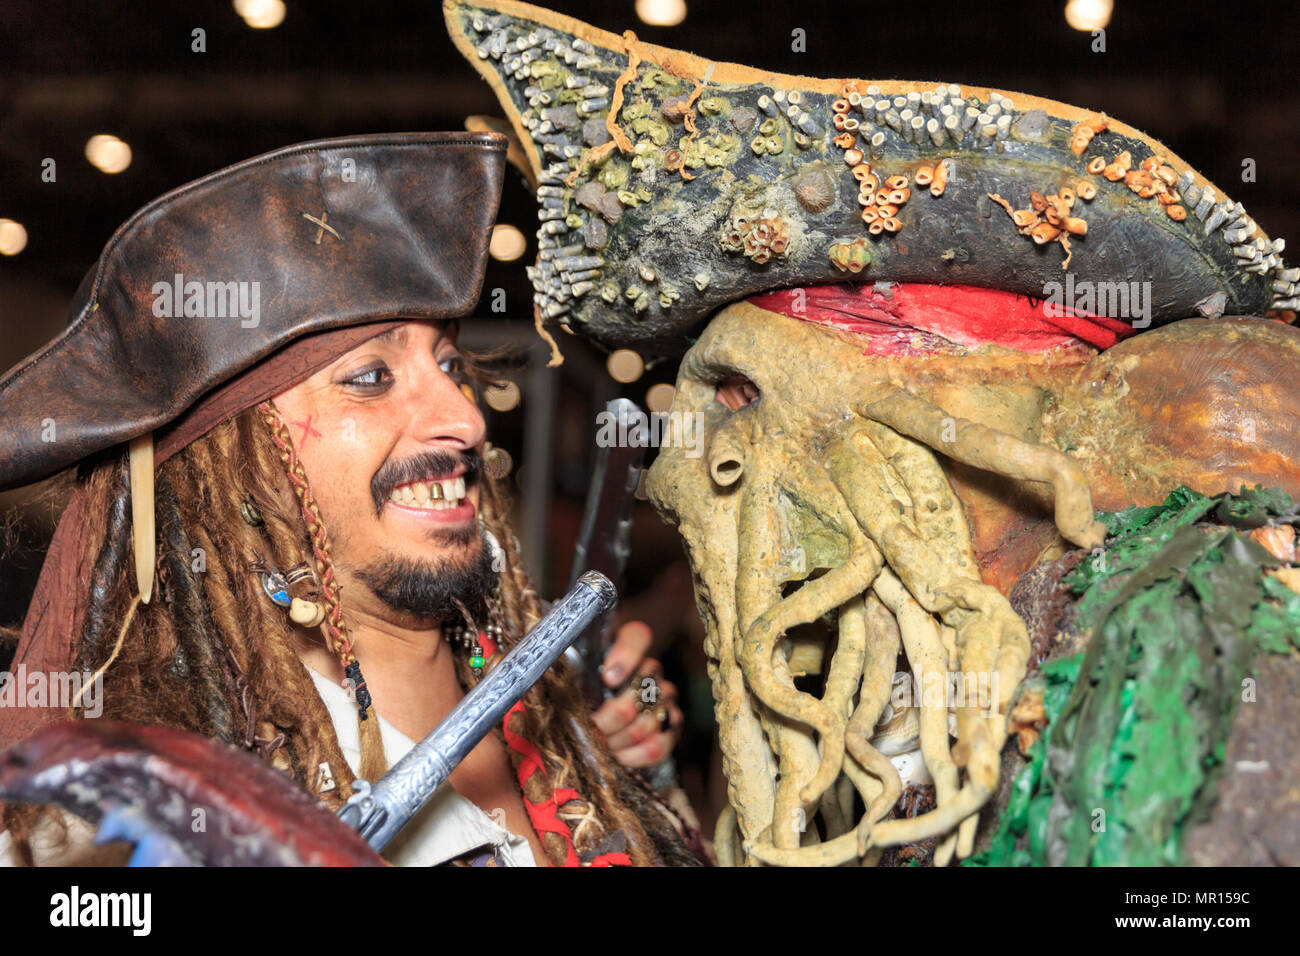 ExCel, London, 25th May 2018. Character cosplayers as Captain Jack Sparrow and Dead Man's Chest from the Pirates of the Caribbean. into pose. Cosplayers, Comic Characters, Superheros and costumed visitors come together for MCM Comicon's London Opening Day 2018, running at ExCel Exhibition Centre May 25-27th. Credit: Imageplotter News and Sports/Alamy Live News Stock Photo